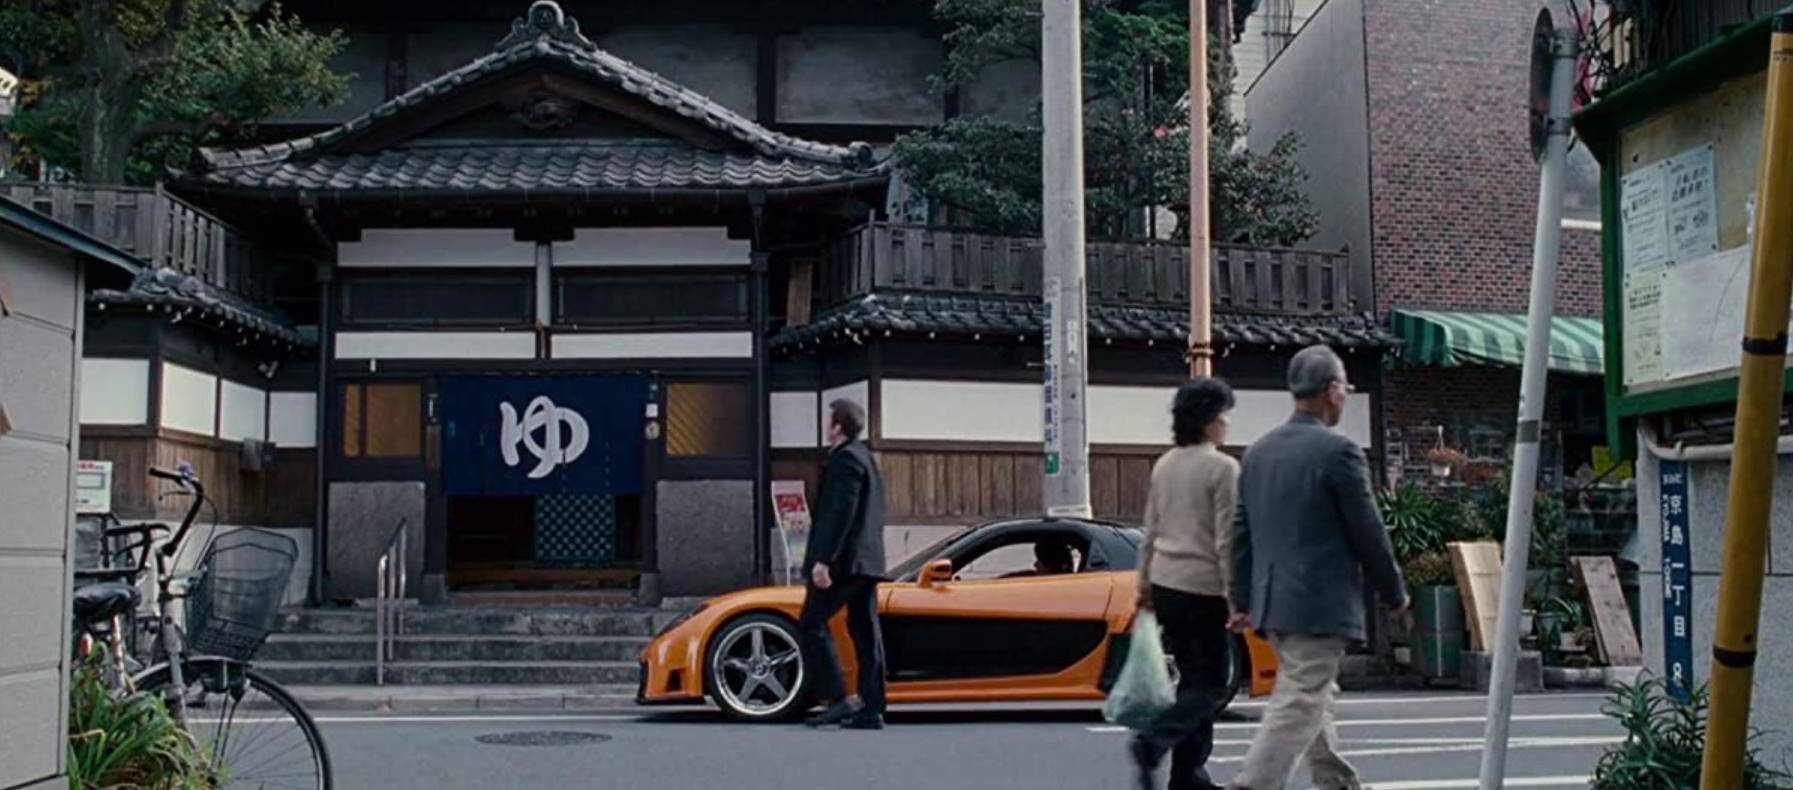 The Fast and the Furious: Tokyo Drift accelerates onto TV and